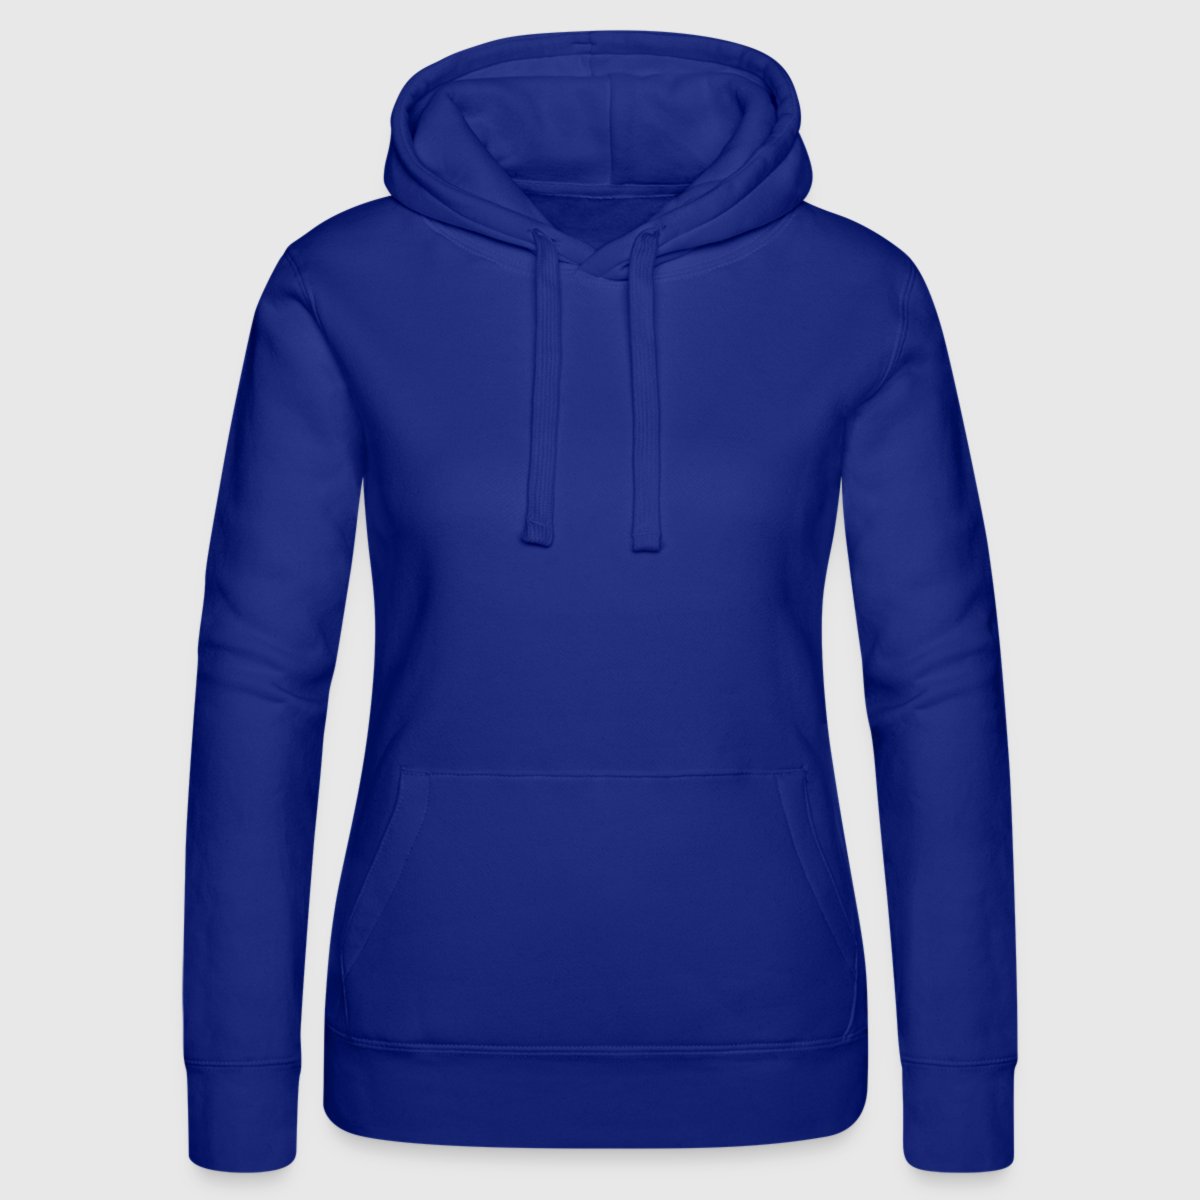 Women’s Hooded Sweater by Russell - Front